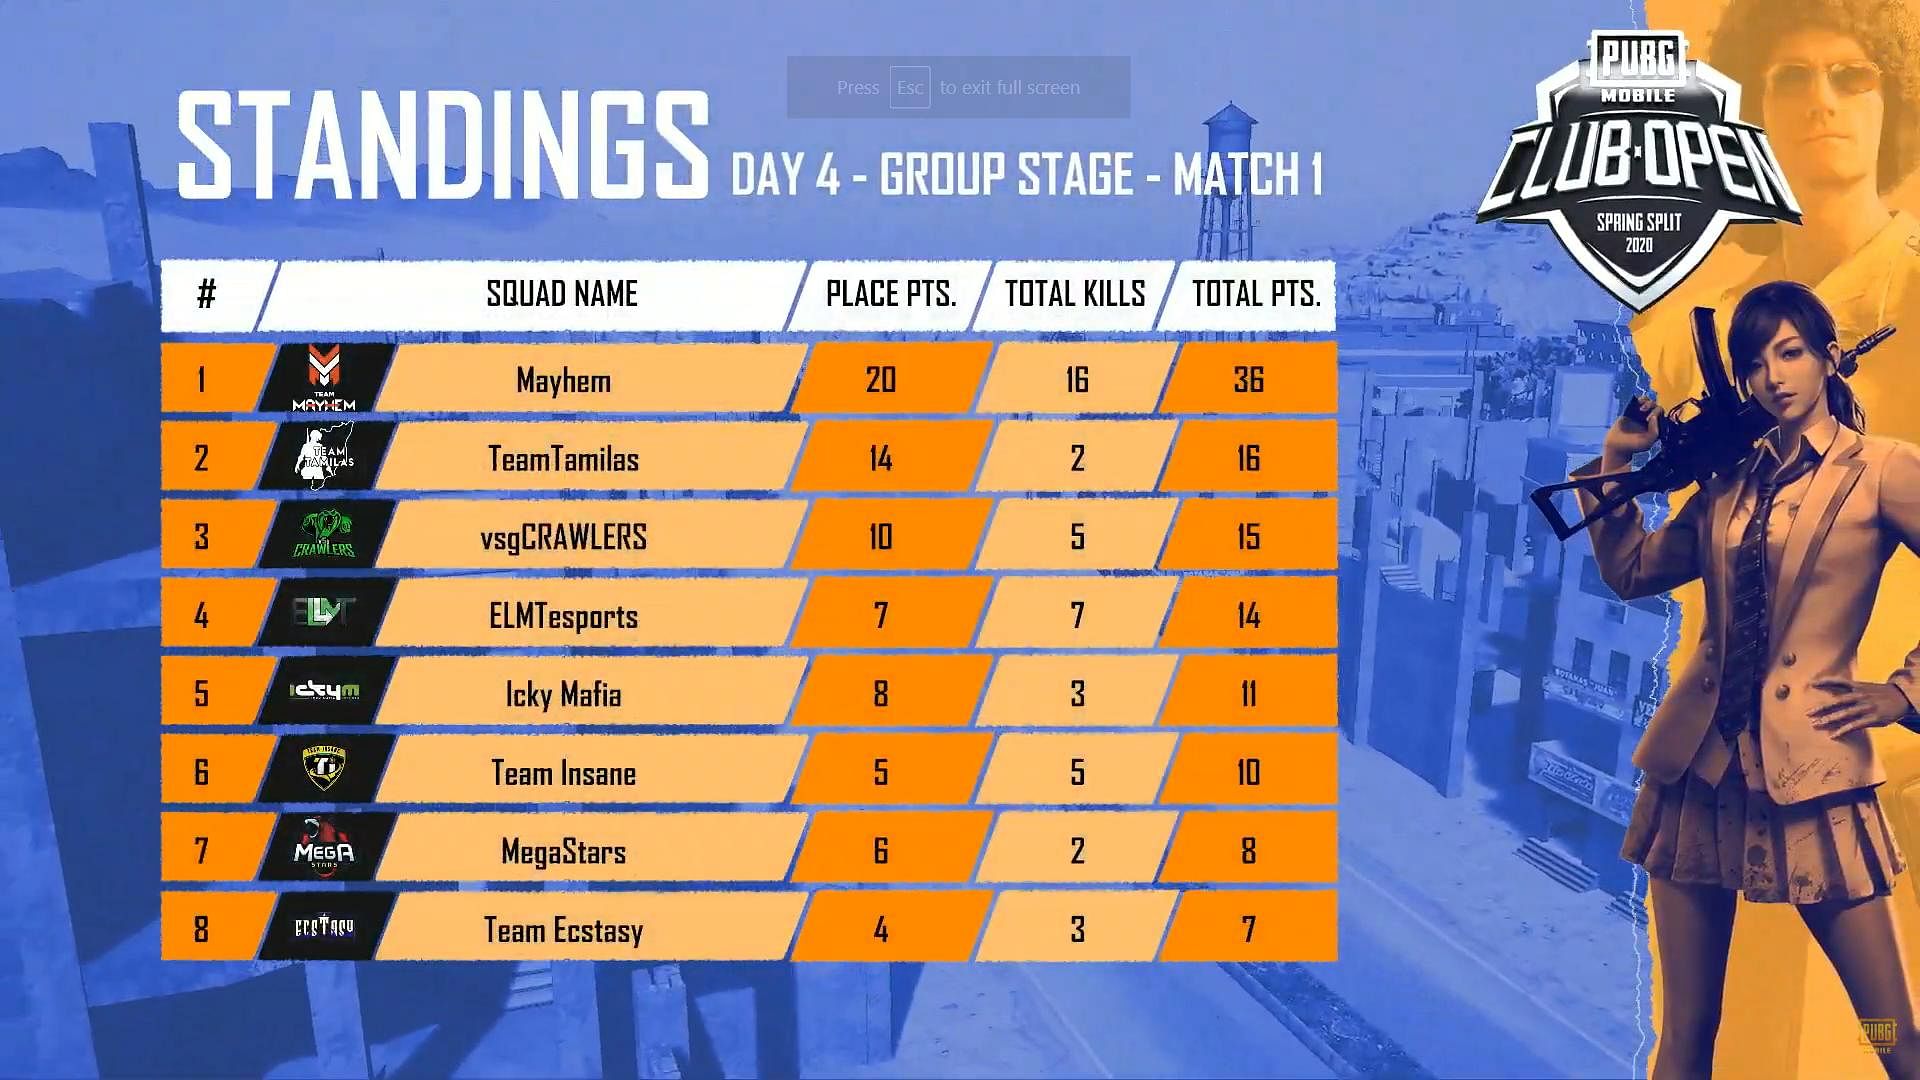 Match standing of Game 1 of Day 4